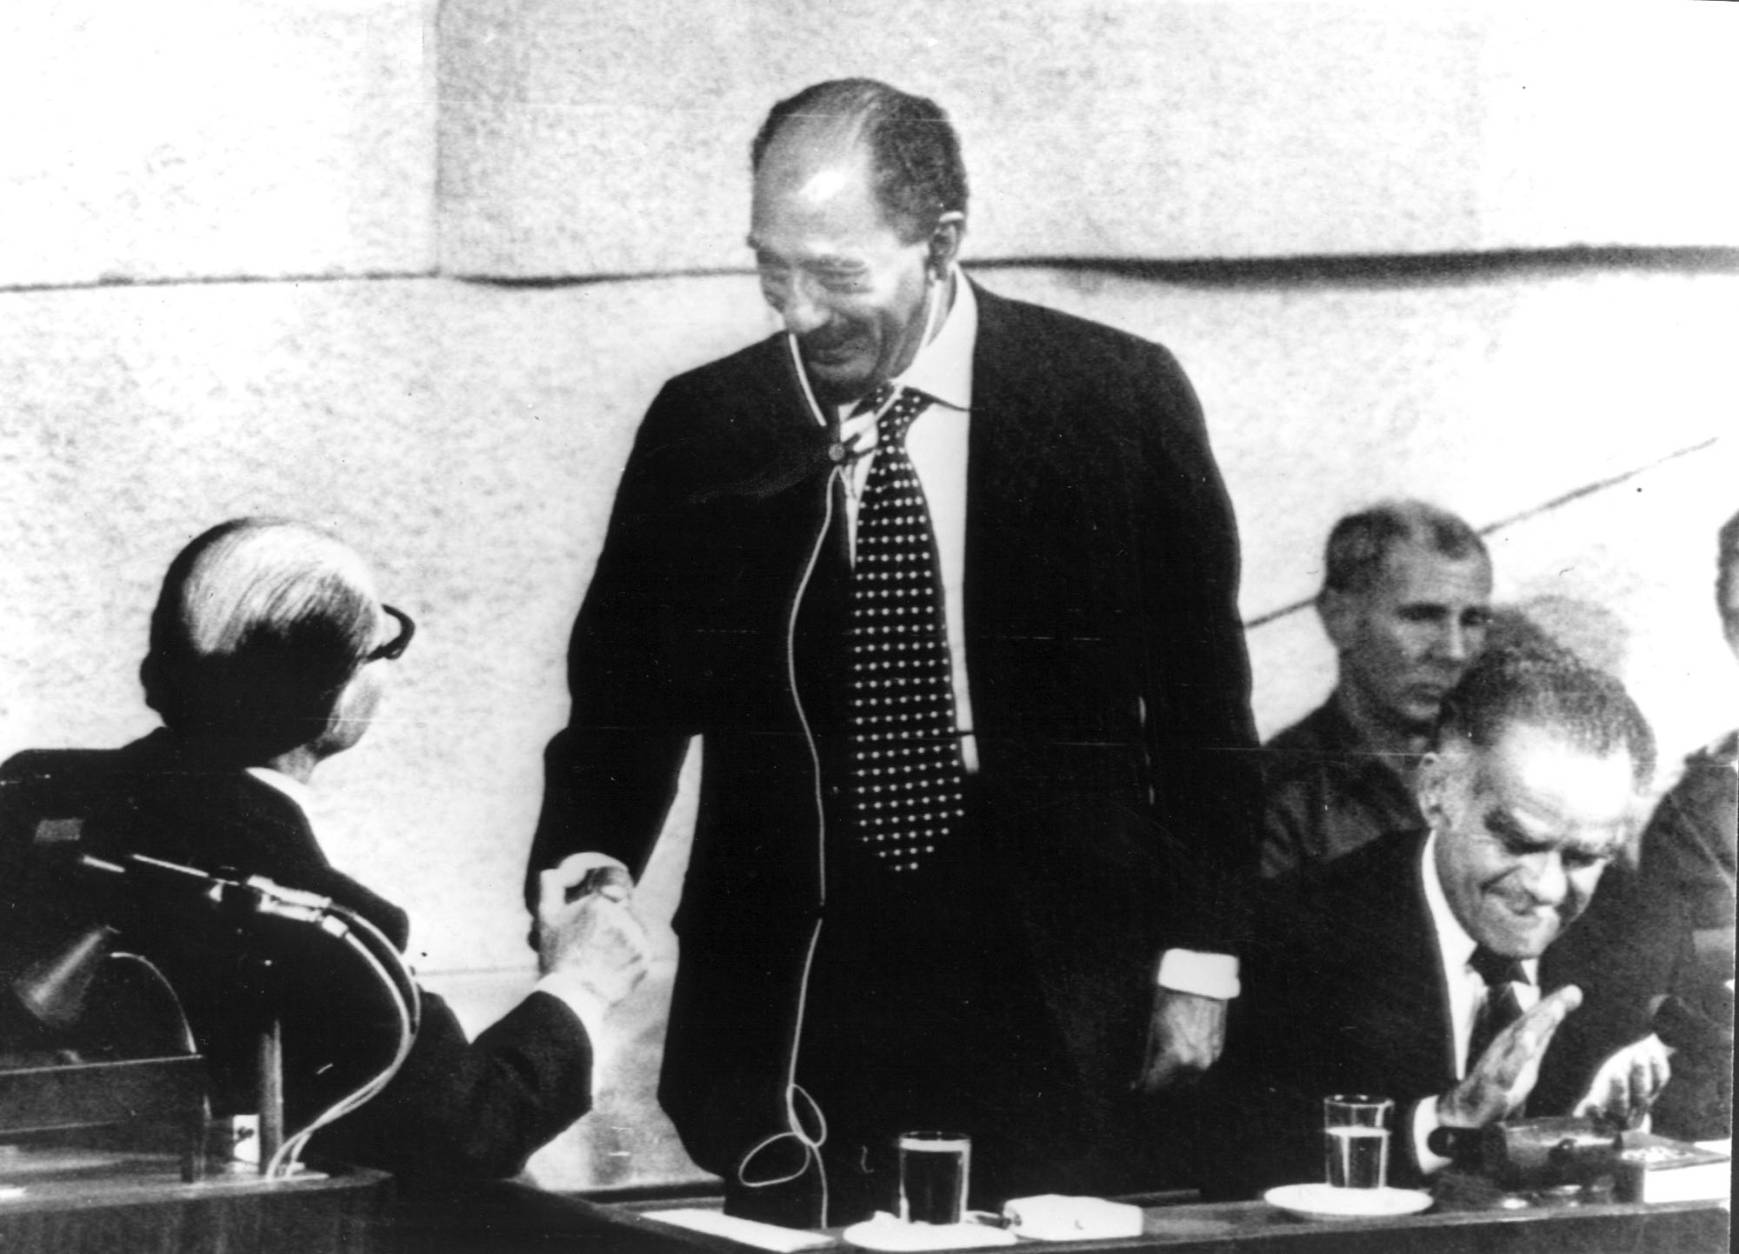 Israel-Egypt Handshake - Israel's Prime Minister Menahem Begin, left, shakes hands with Egyptian President Anwar As Sadat after Sadat adressed the Knesset Sunday afternoon, November 20, 1977. At right the chairman of the Parliament, Mr. Isaak Shamir, applaudes the historic handshakes. (AP-Photo/Pool-upi)